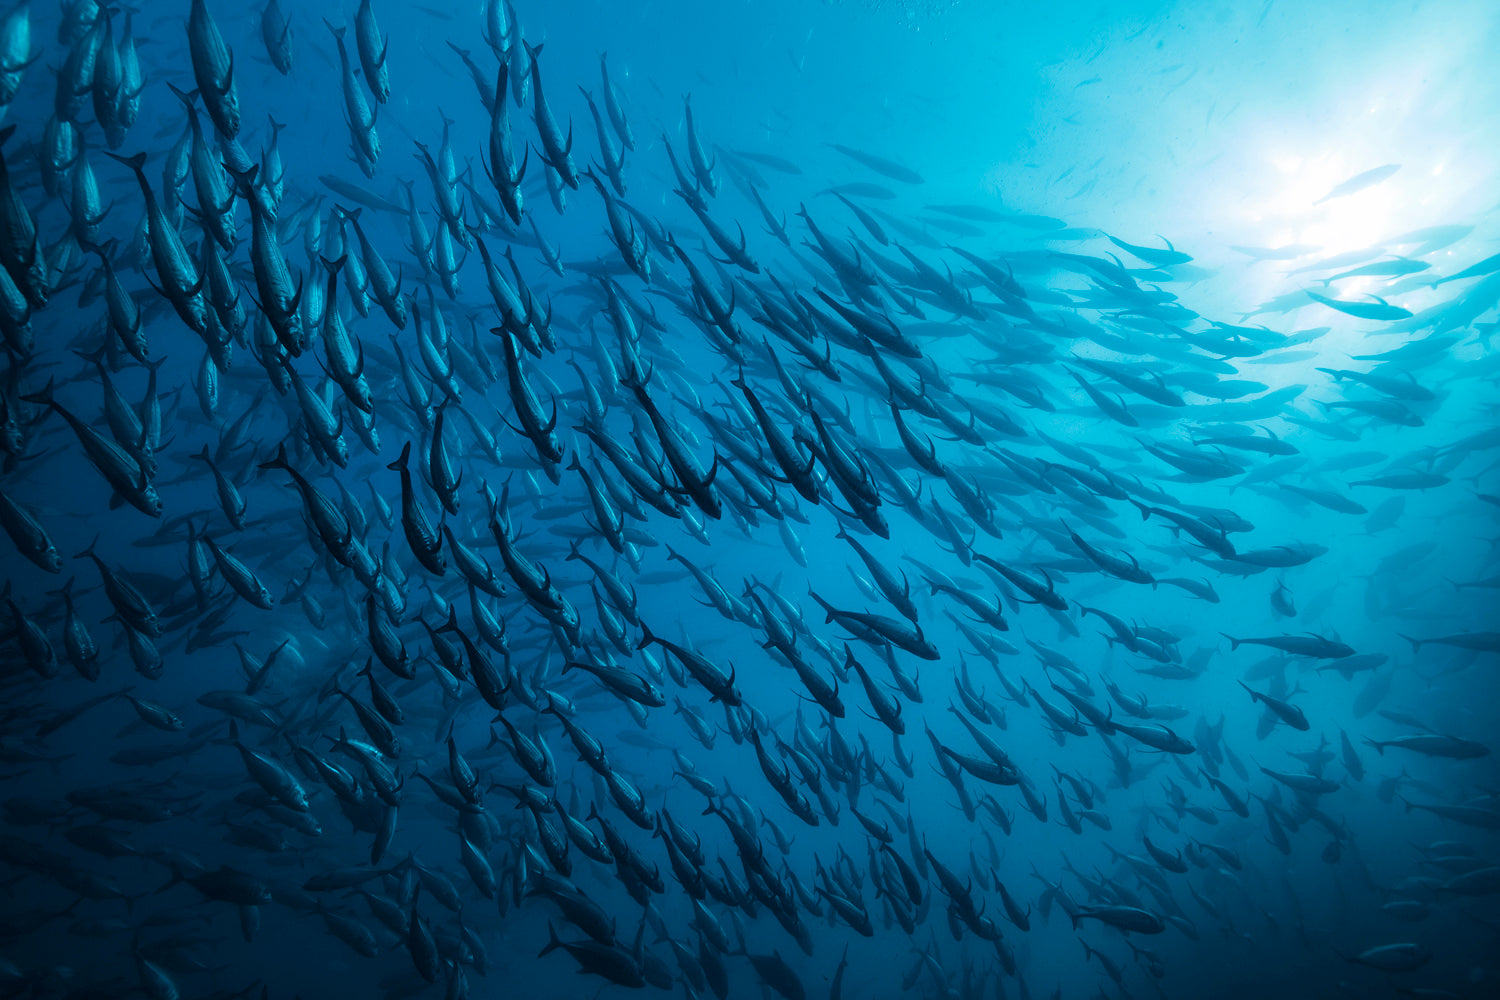 from below looking up to the bright surface of blue water with hundreds of fish swimming